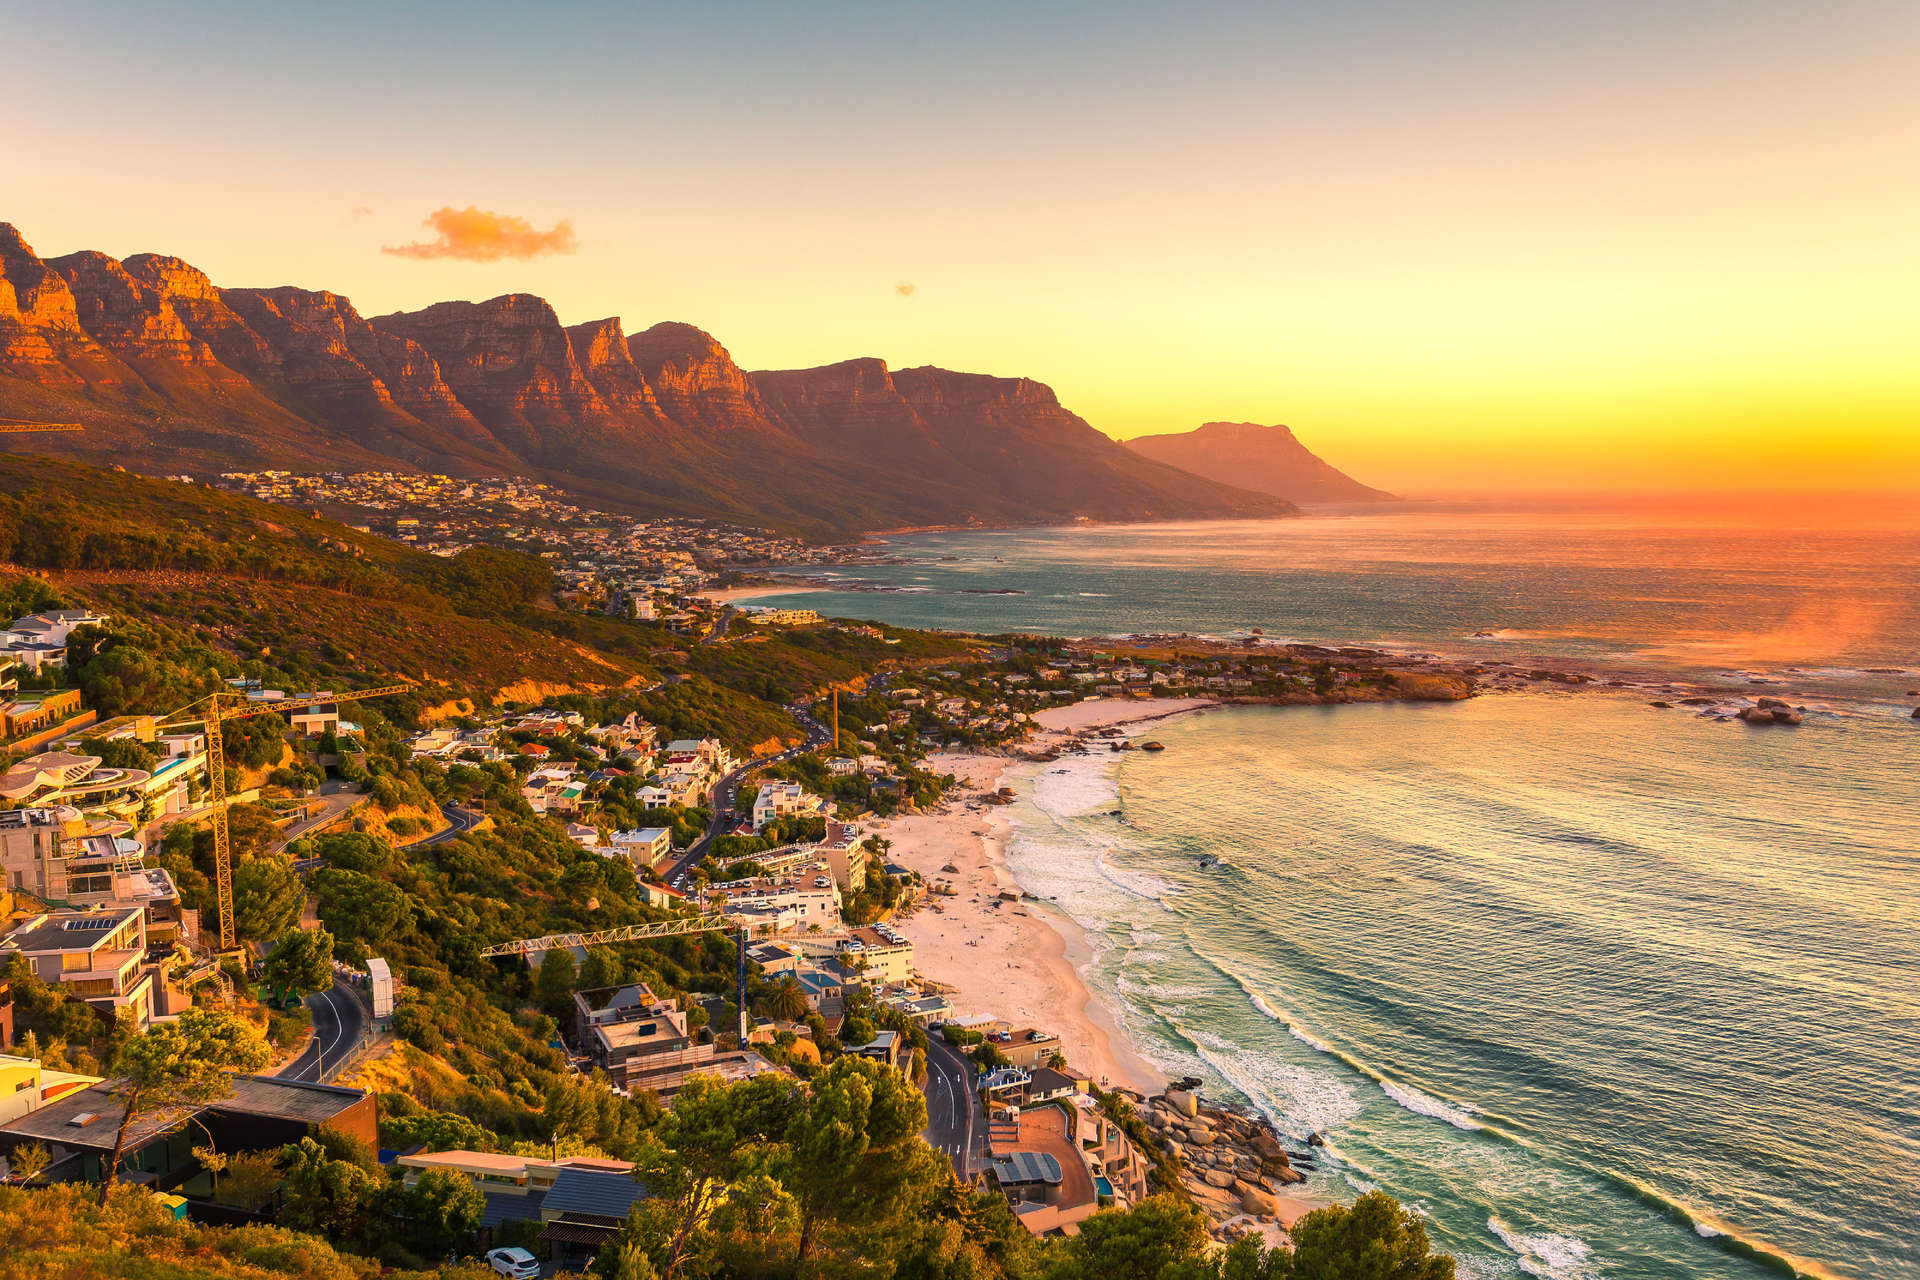 Sunset at Cape Town with scenic view